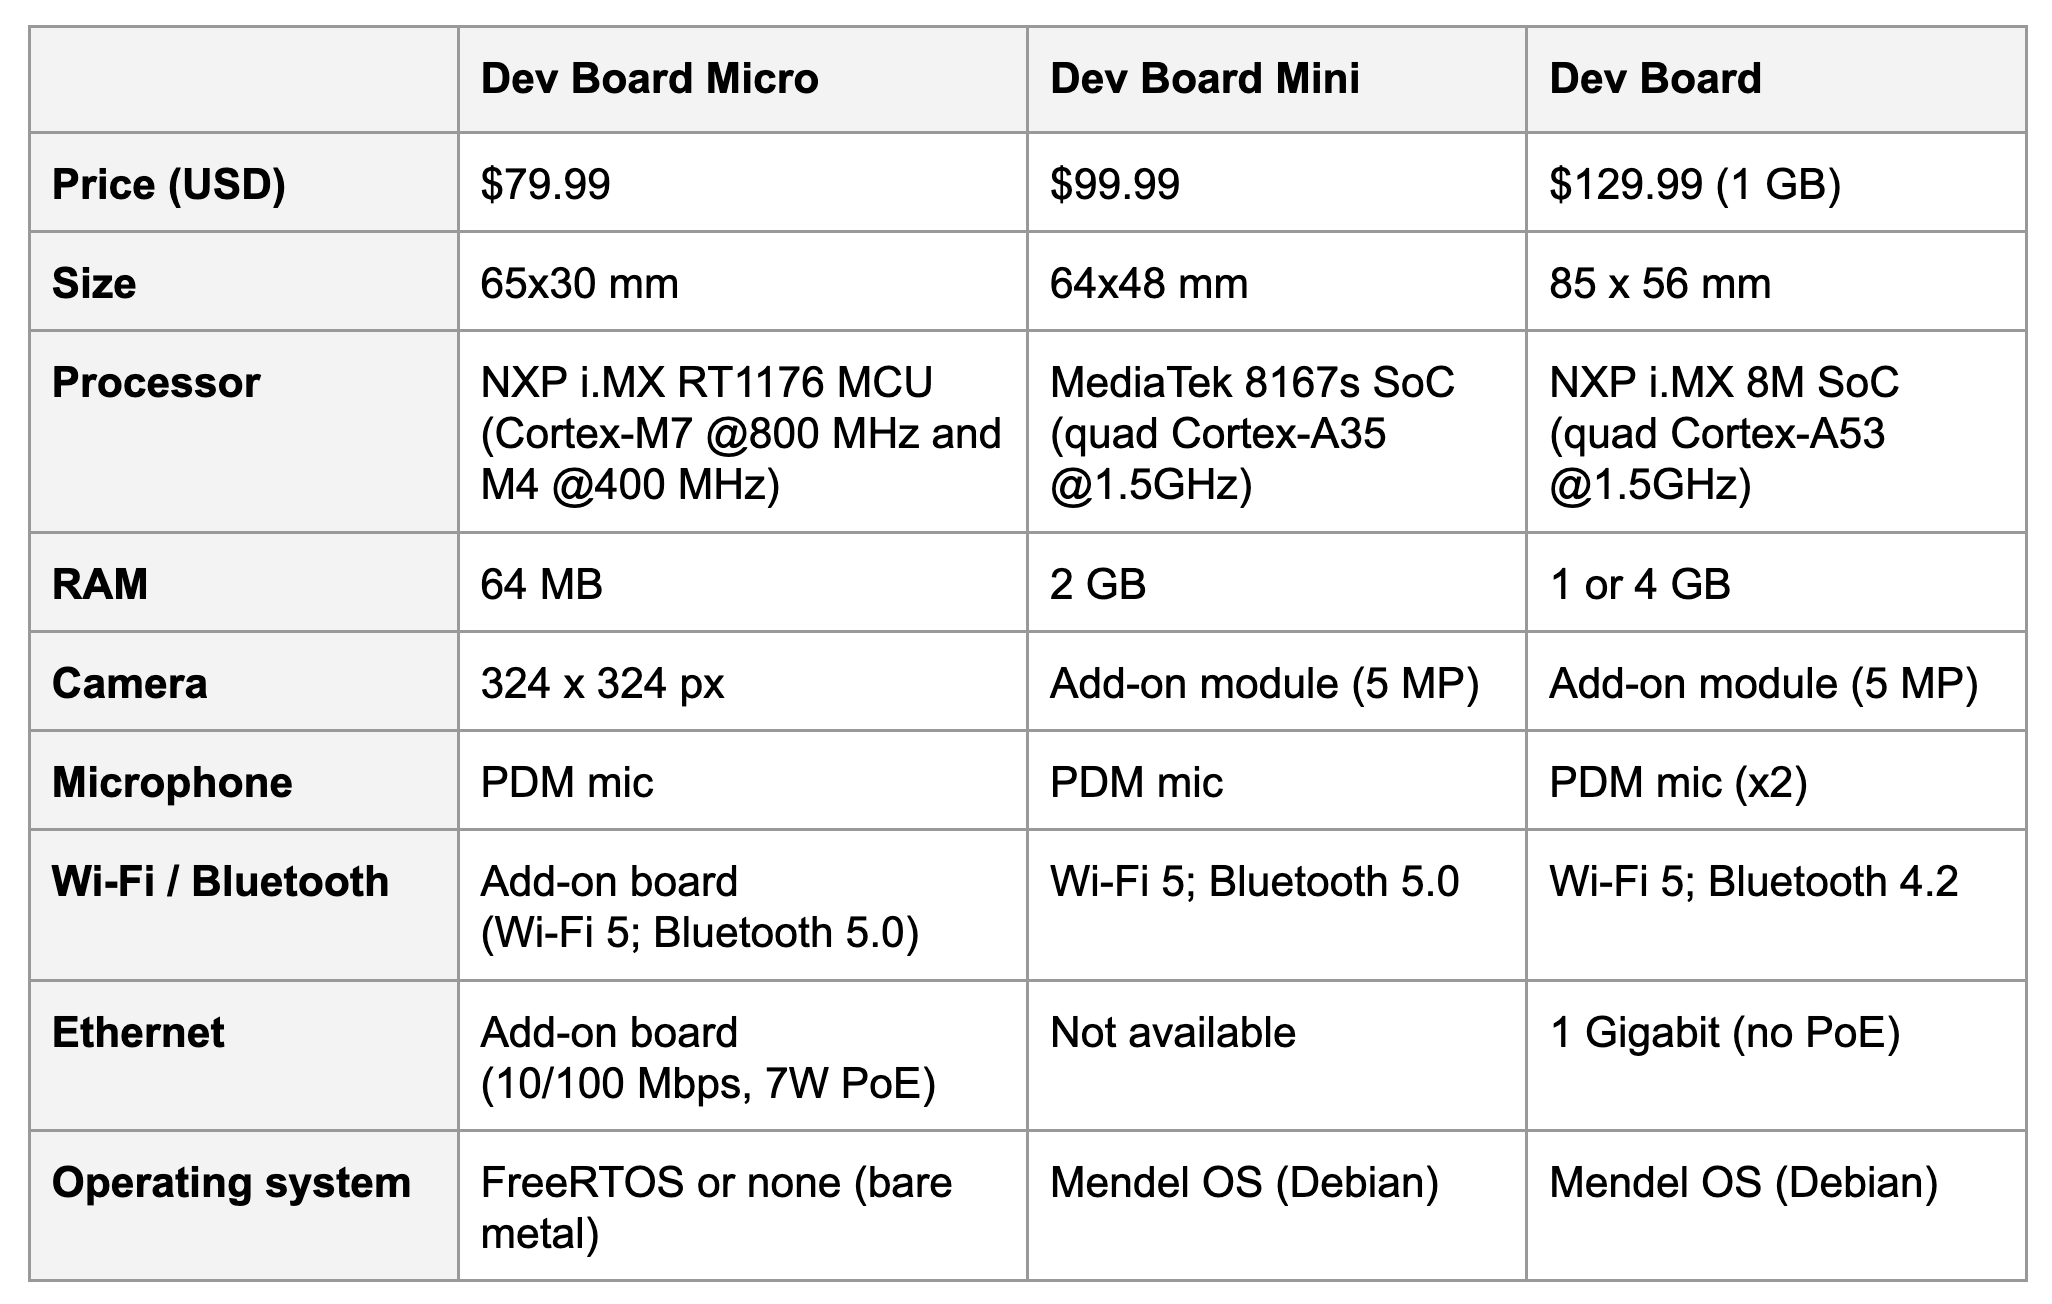 Table comparing the price (USD), size, processor,RAM, camera, microphone, wi-fi/bluetooth, ethernet, and operating system capabilities across Dev Board Micro, Dev Board Mini and Dev Board